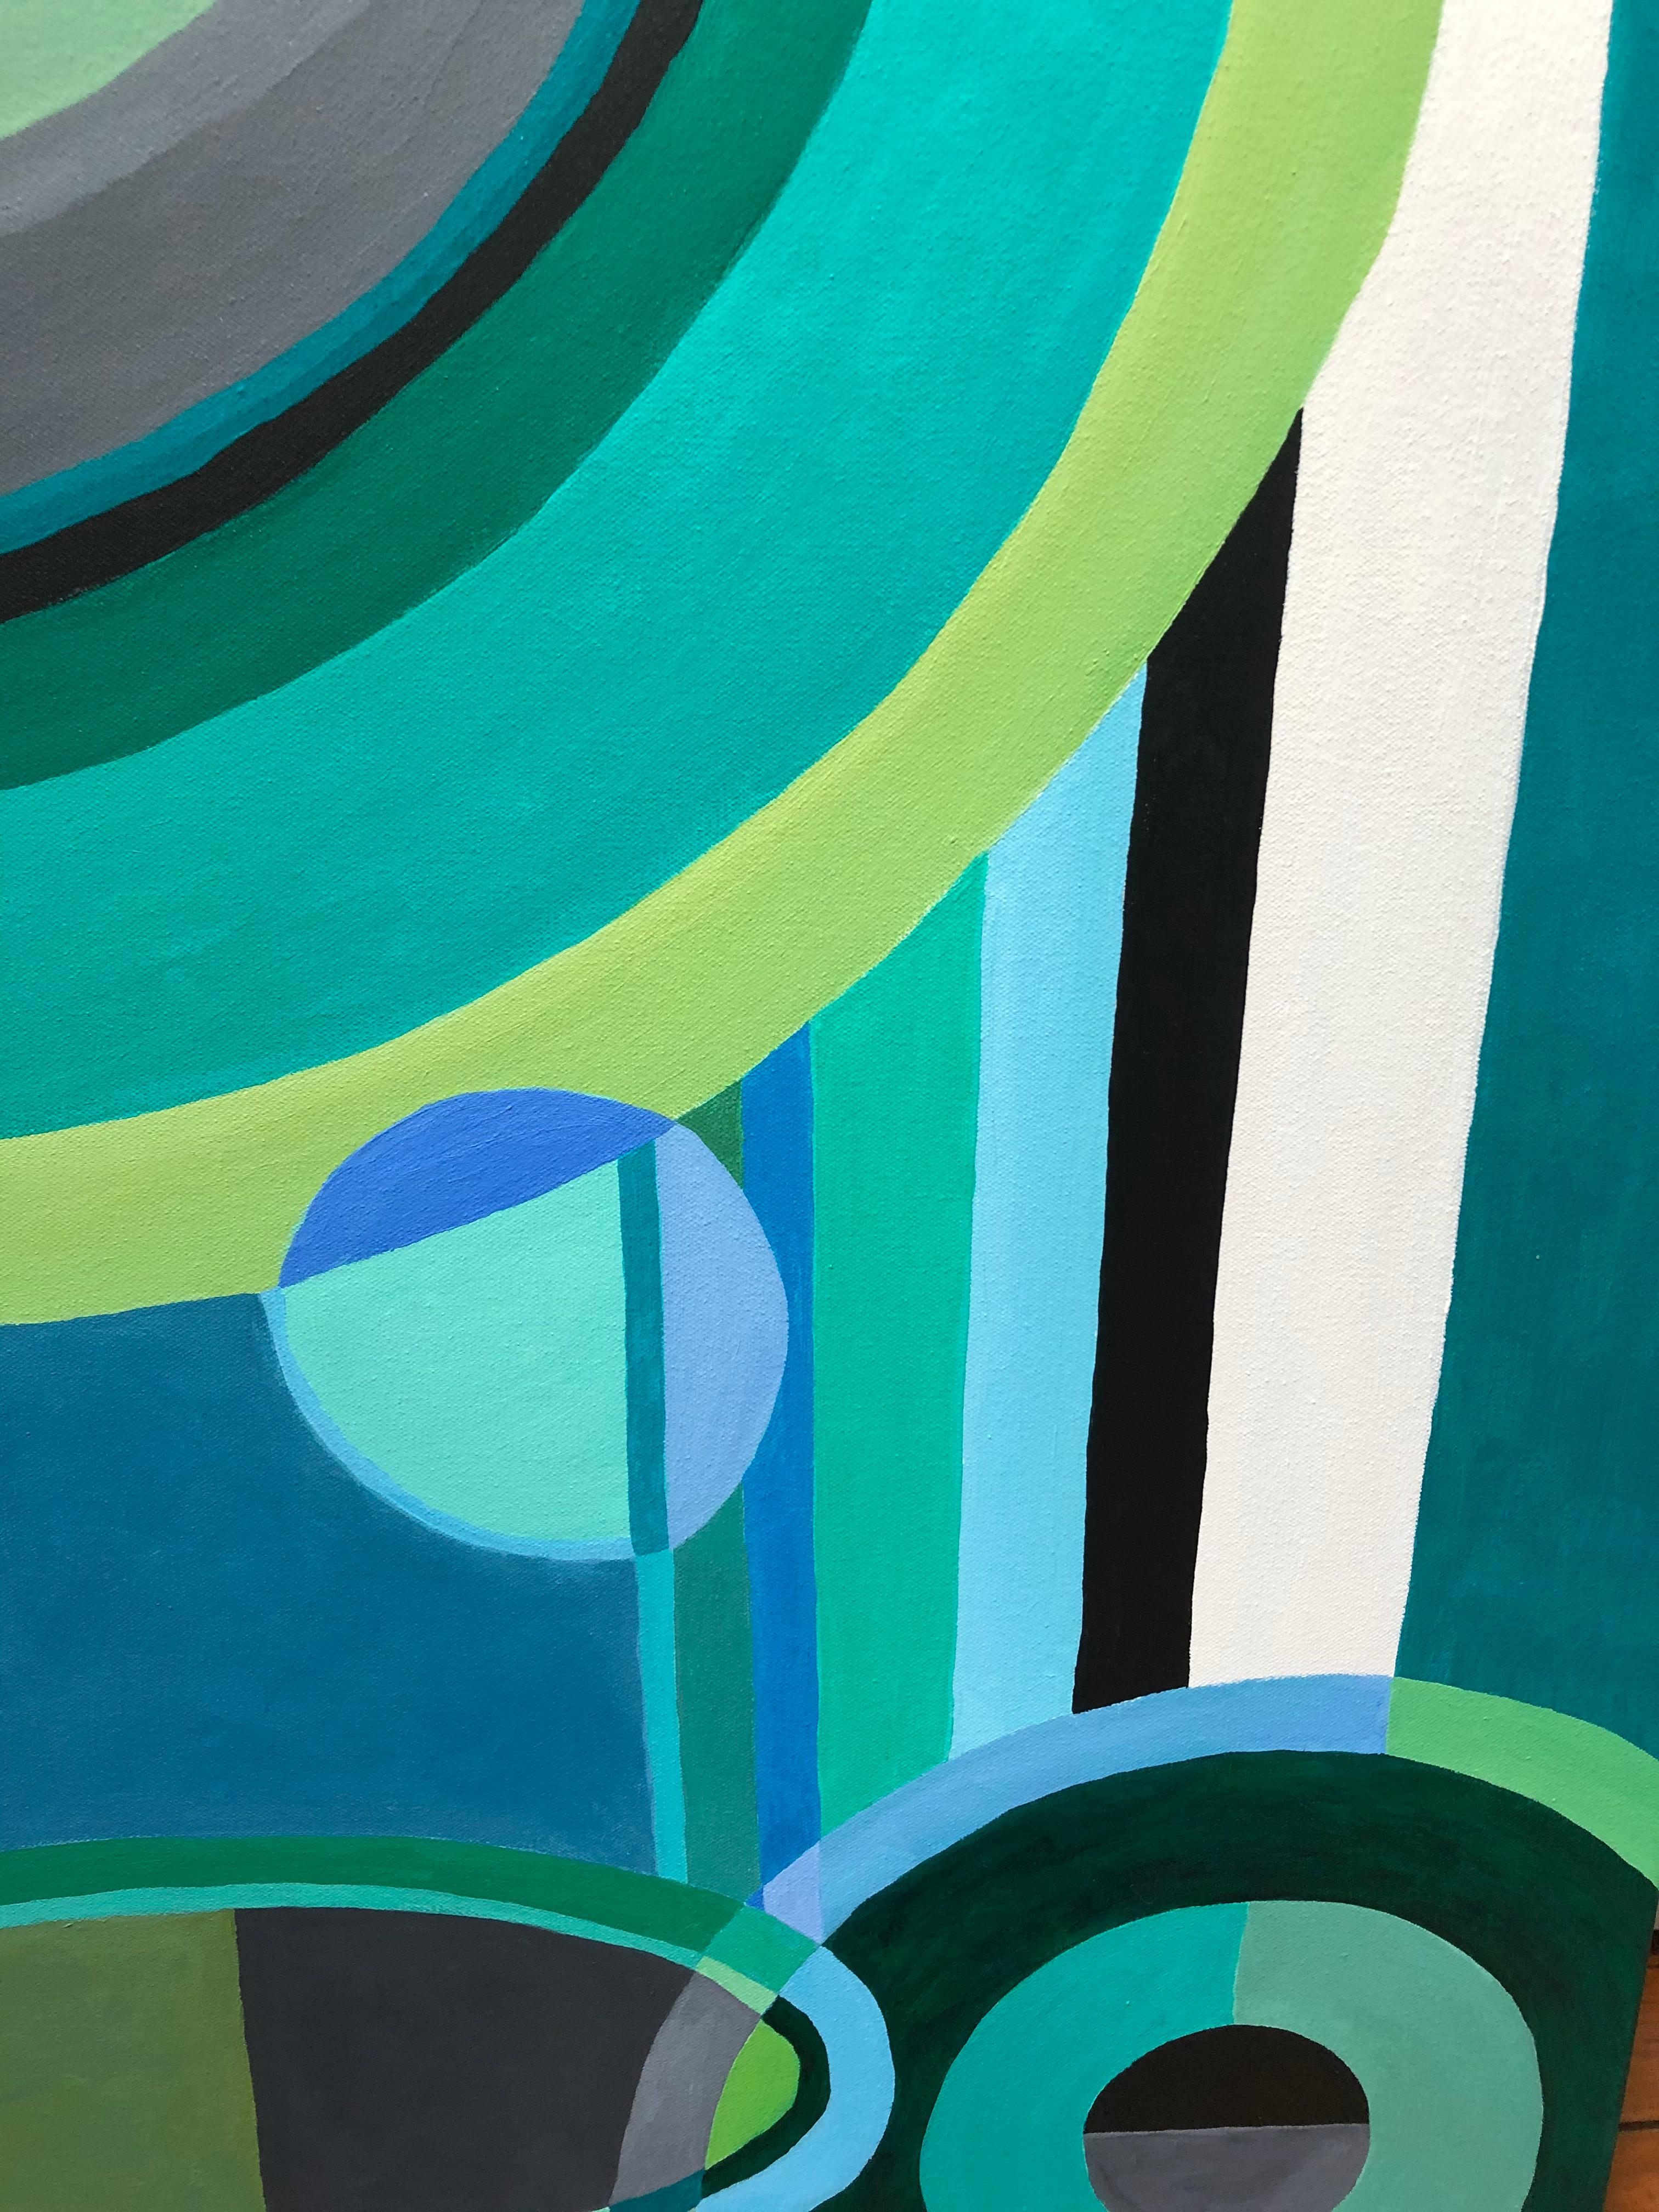 A striking abstract composition with gorgeous color palette of greens, blues, grey, black and white.
The unpredictable arrangement of circles, ovals, lines and overlapping shapes exudes a sense of power and calm simultaneously.